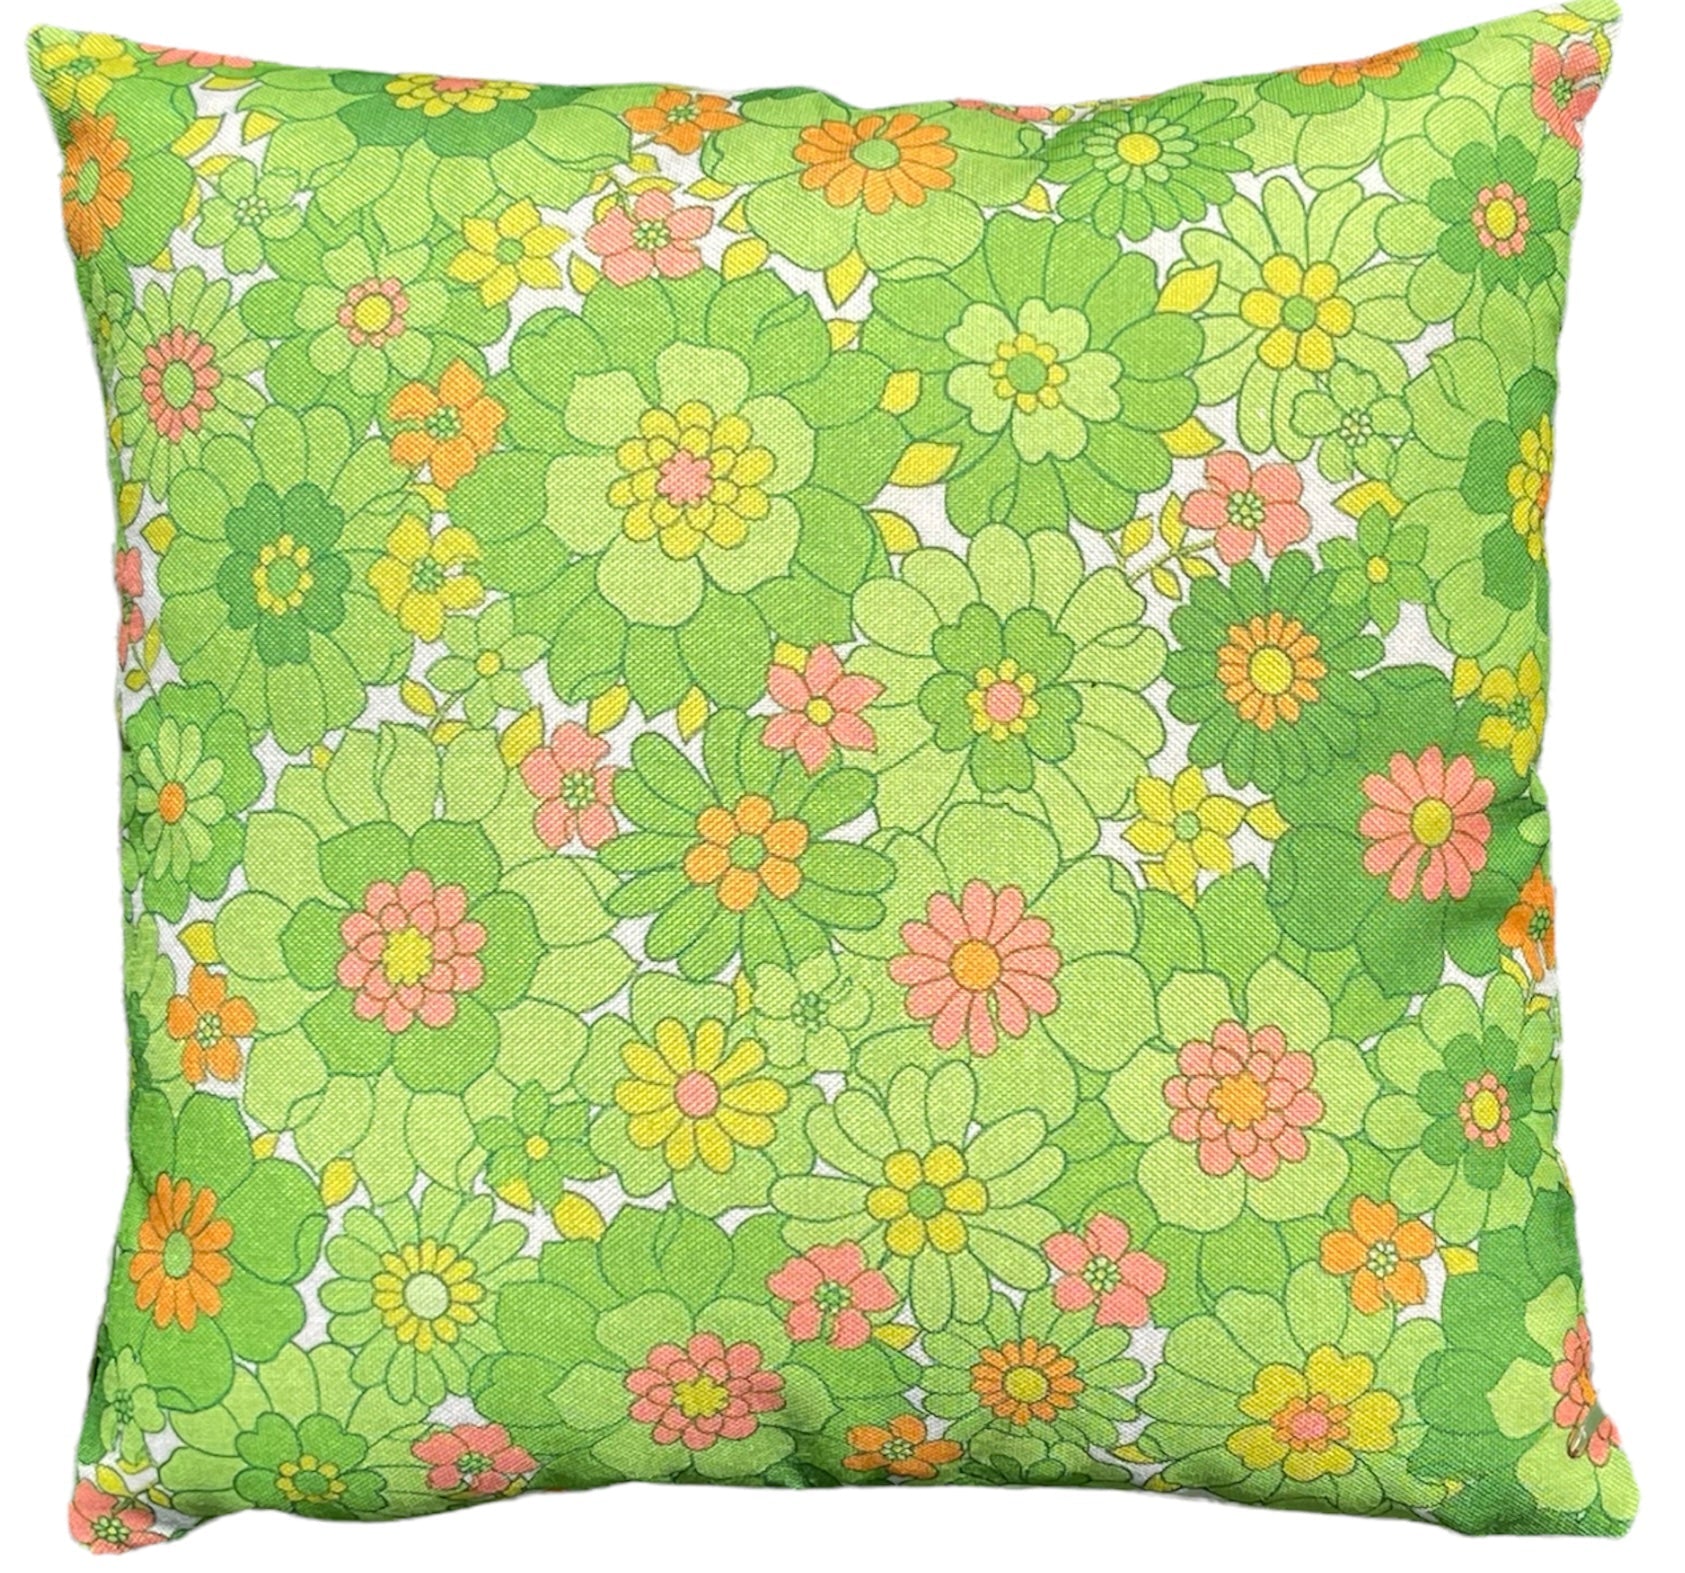 Groovy Purple and Pink Flower Power 18 by 18 inch Pillow Case Cover –  Relic828